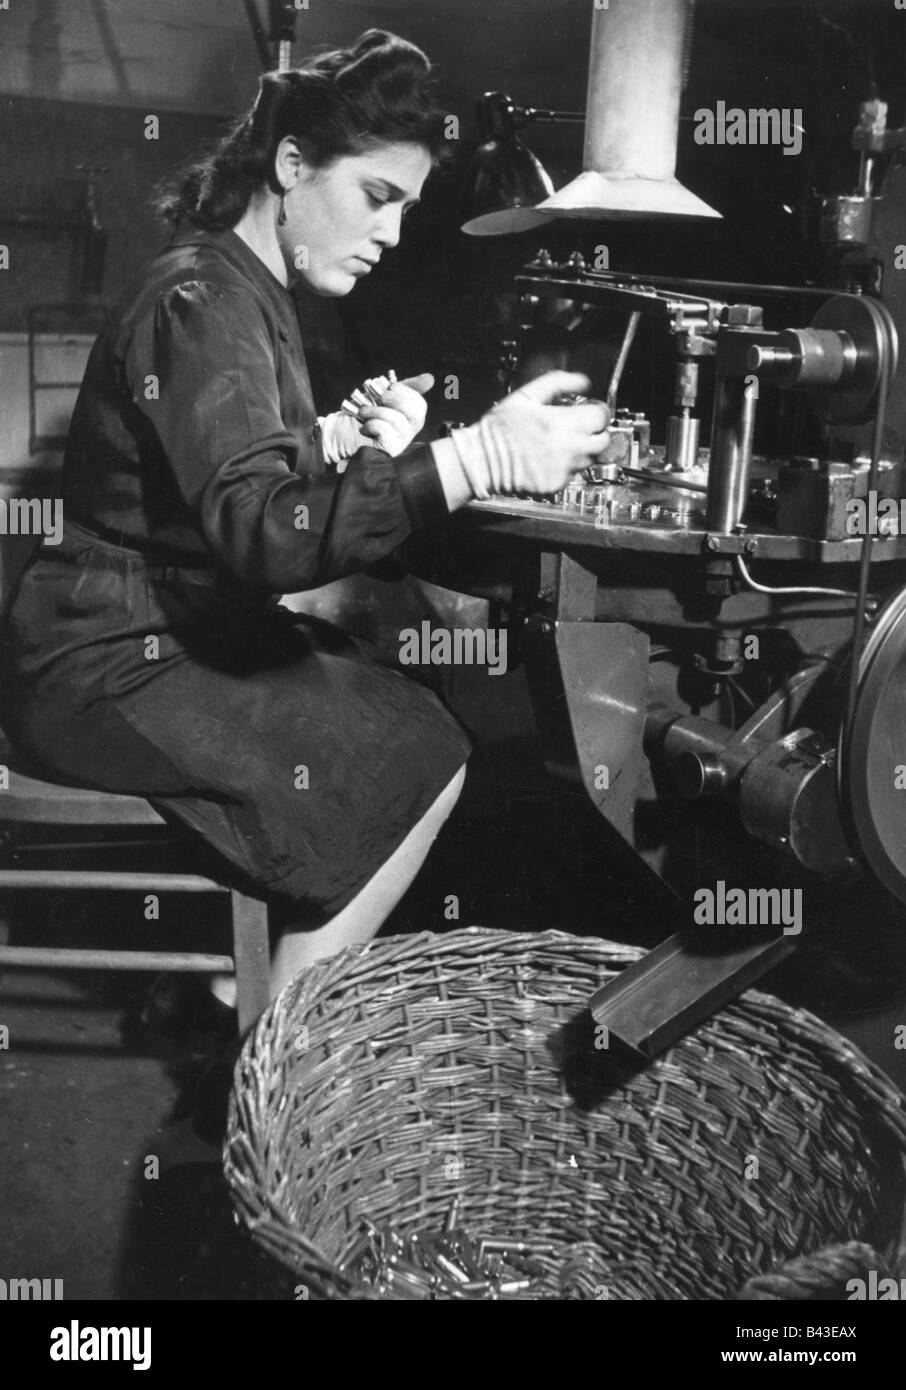 events, Second World War / WWII, Germany, armaments industry, production of ammunition, woman at machine, Berlin, 1942, propagada photo, Stock Photo